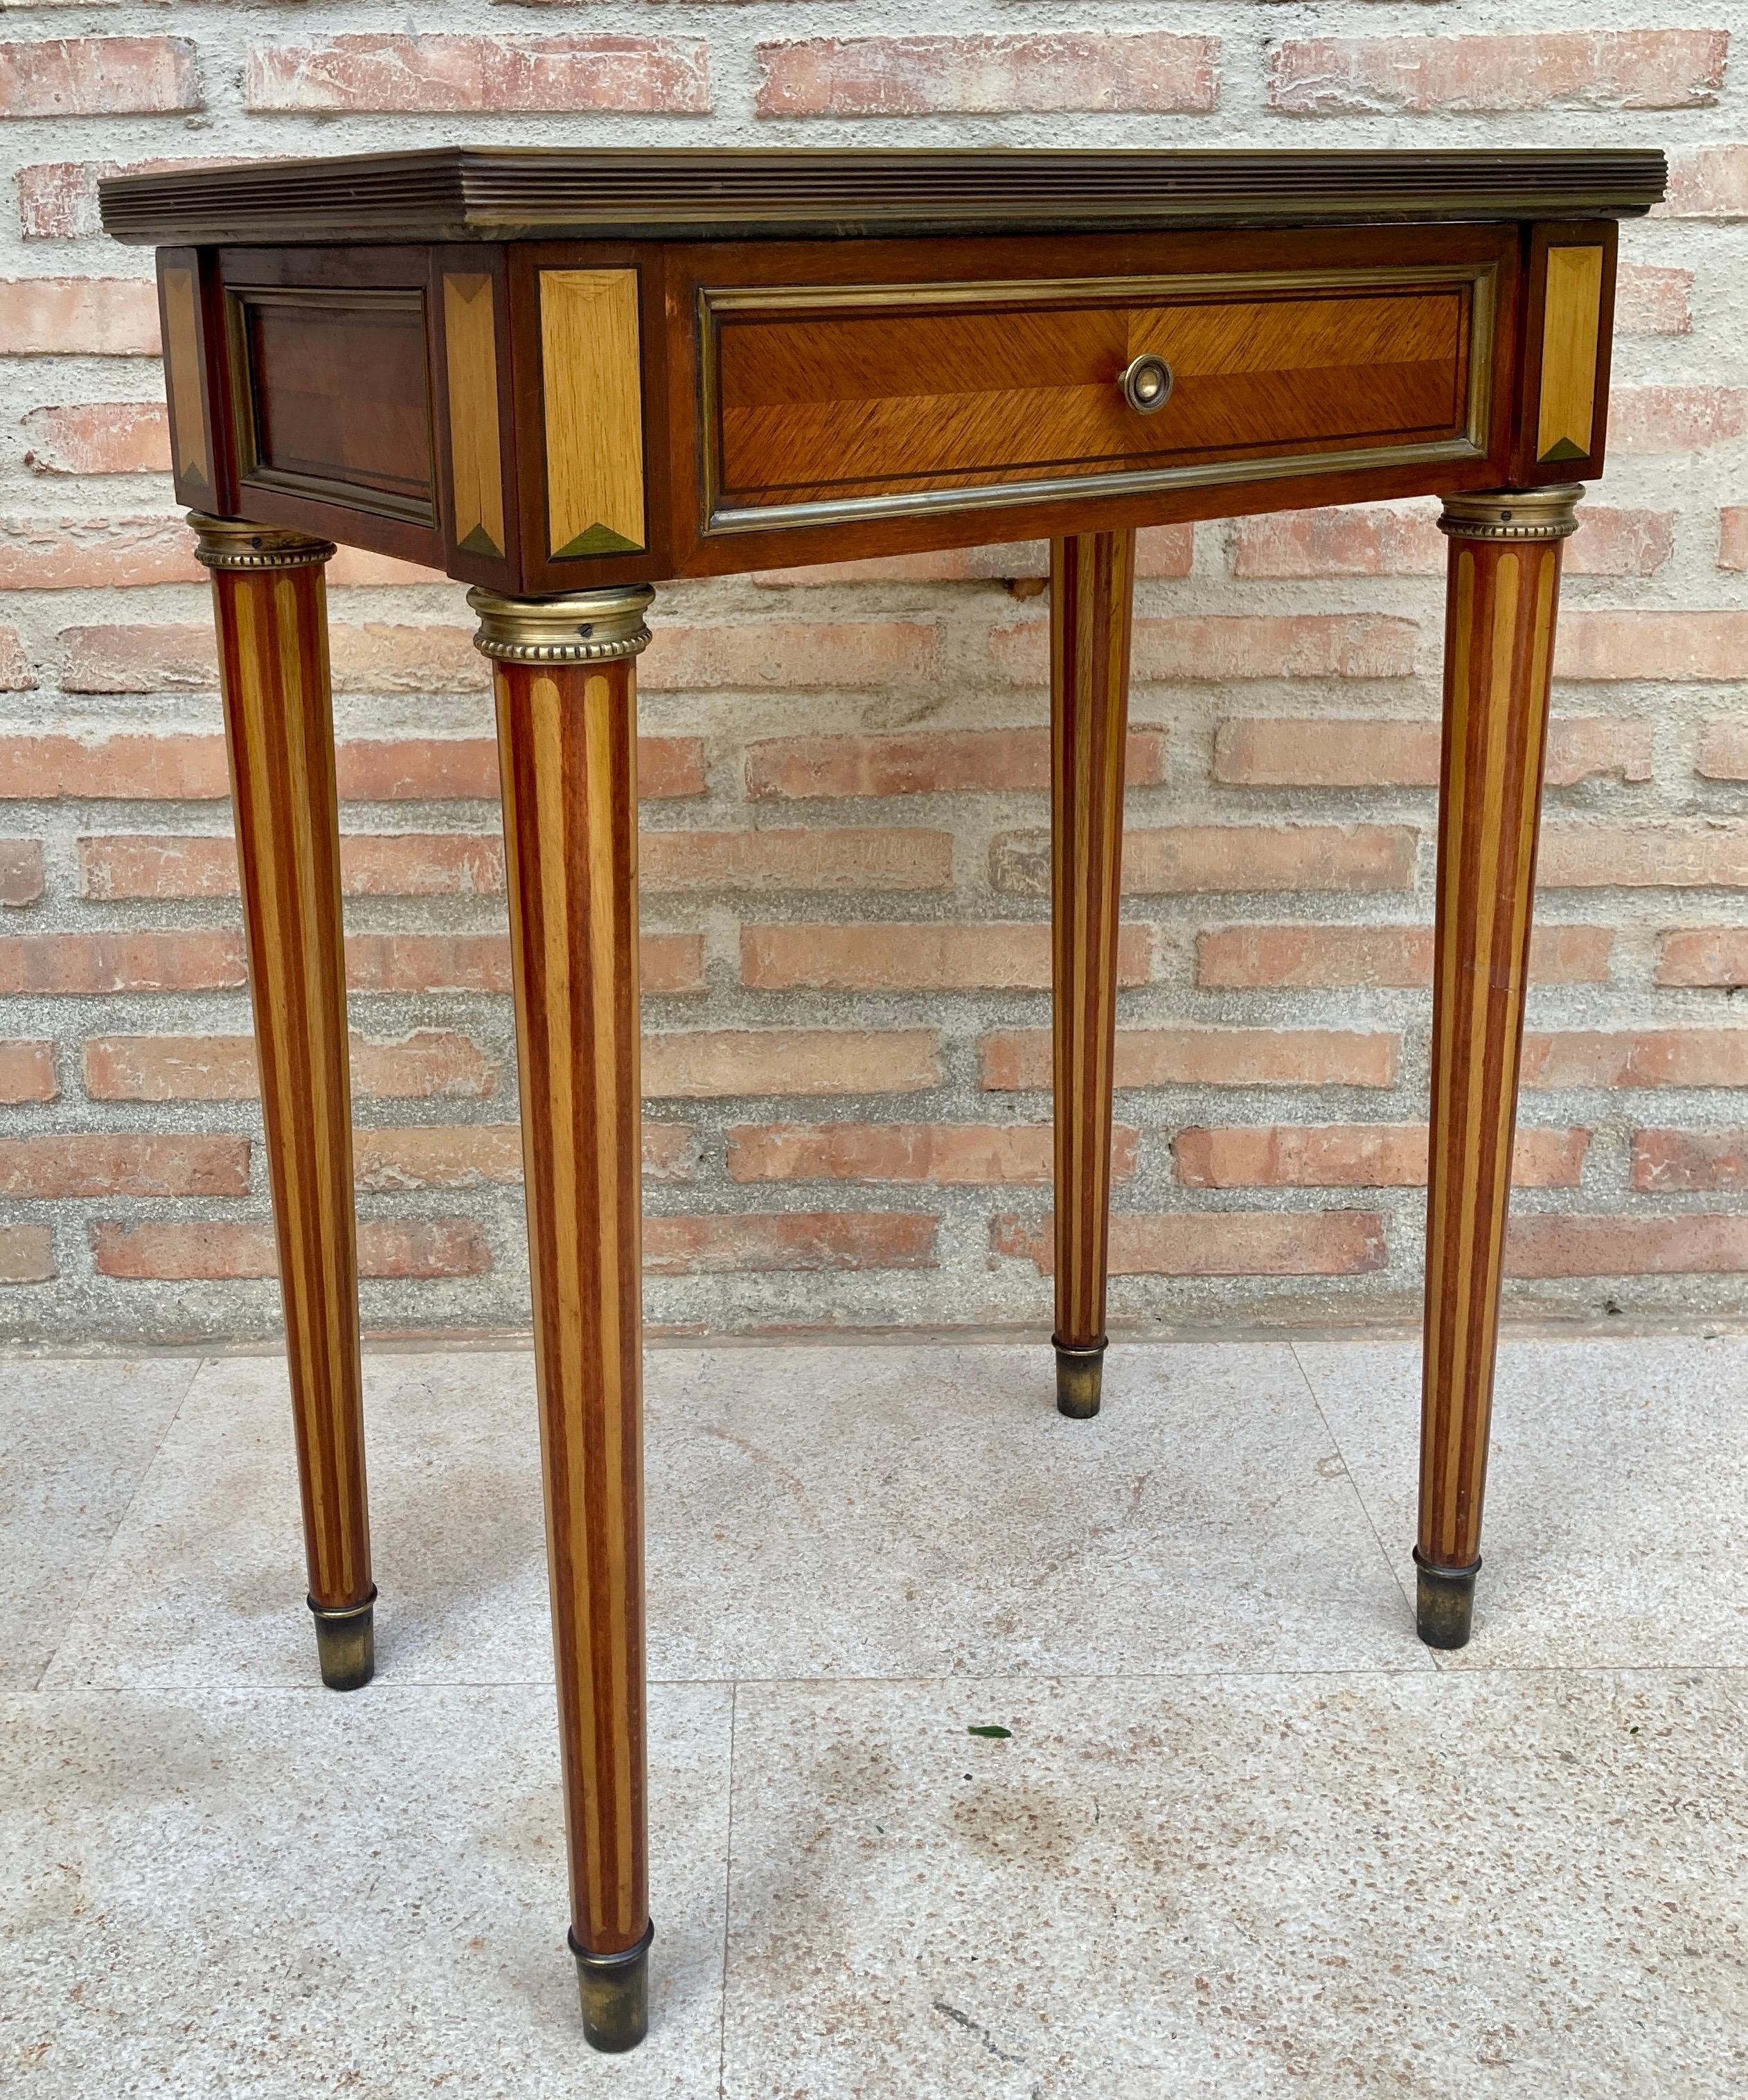 French Provincial Neoclassical Mahogany Side Table With Fluted Legs And Green Marble, 1920s For Sale